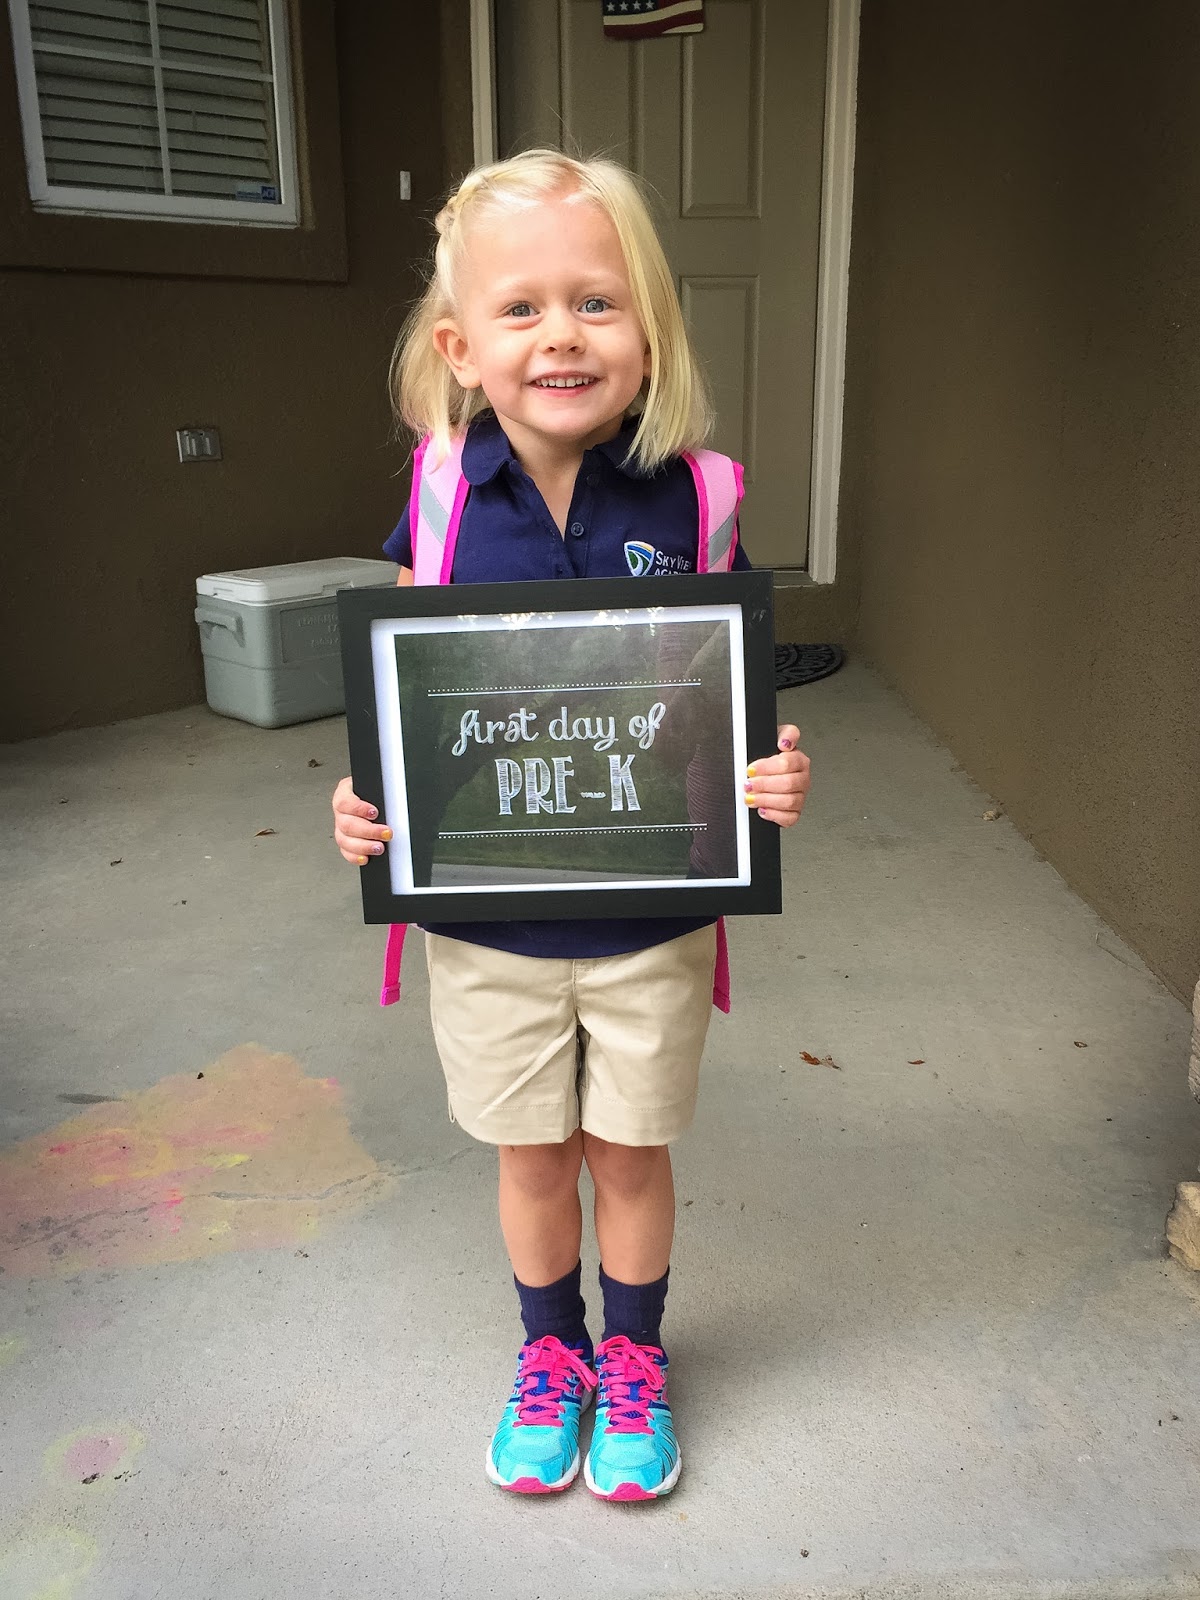 First Day of School! Through the Looking Lens...